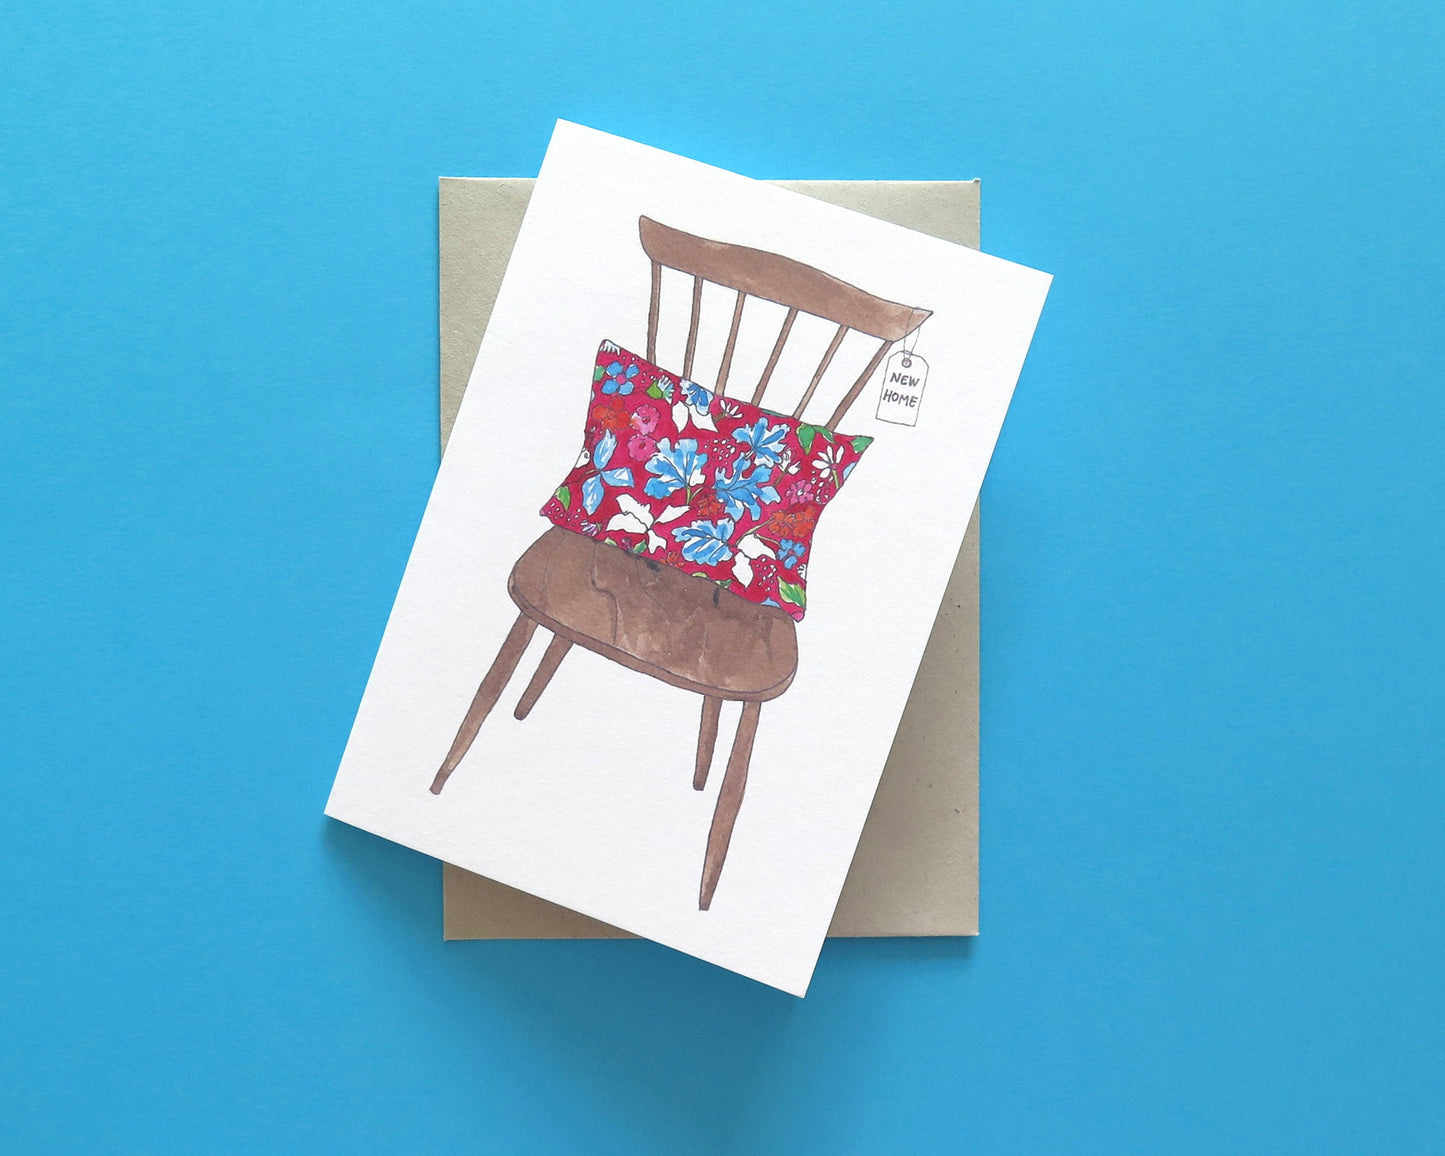 New Home Chair Card